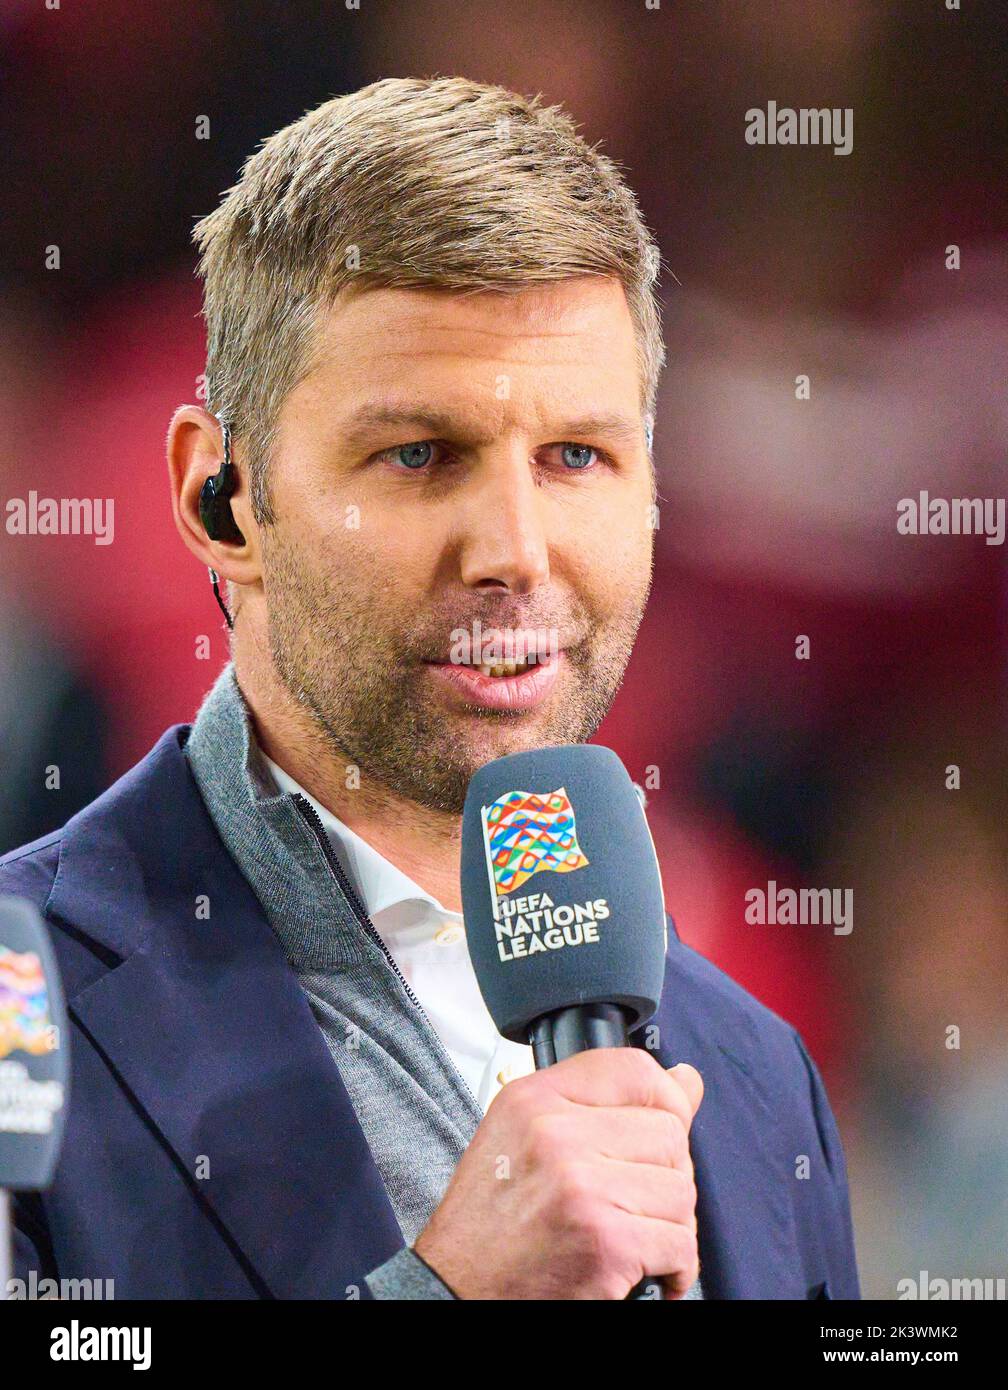 Thomas HITZLSPERGER, TV experte in the UEFA Nations League 2022 match  ENGLAND - GERMANY 3-3  in Season 2022/2023 on Sept 26, 2022  in London, Great Britain.  © Peter Schatz / Alamy Live News Stock Photo